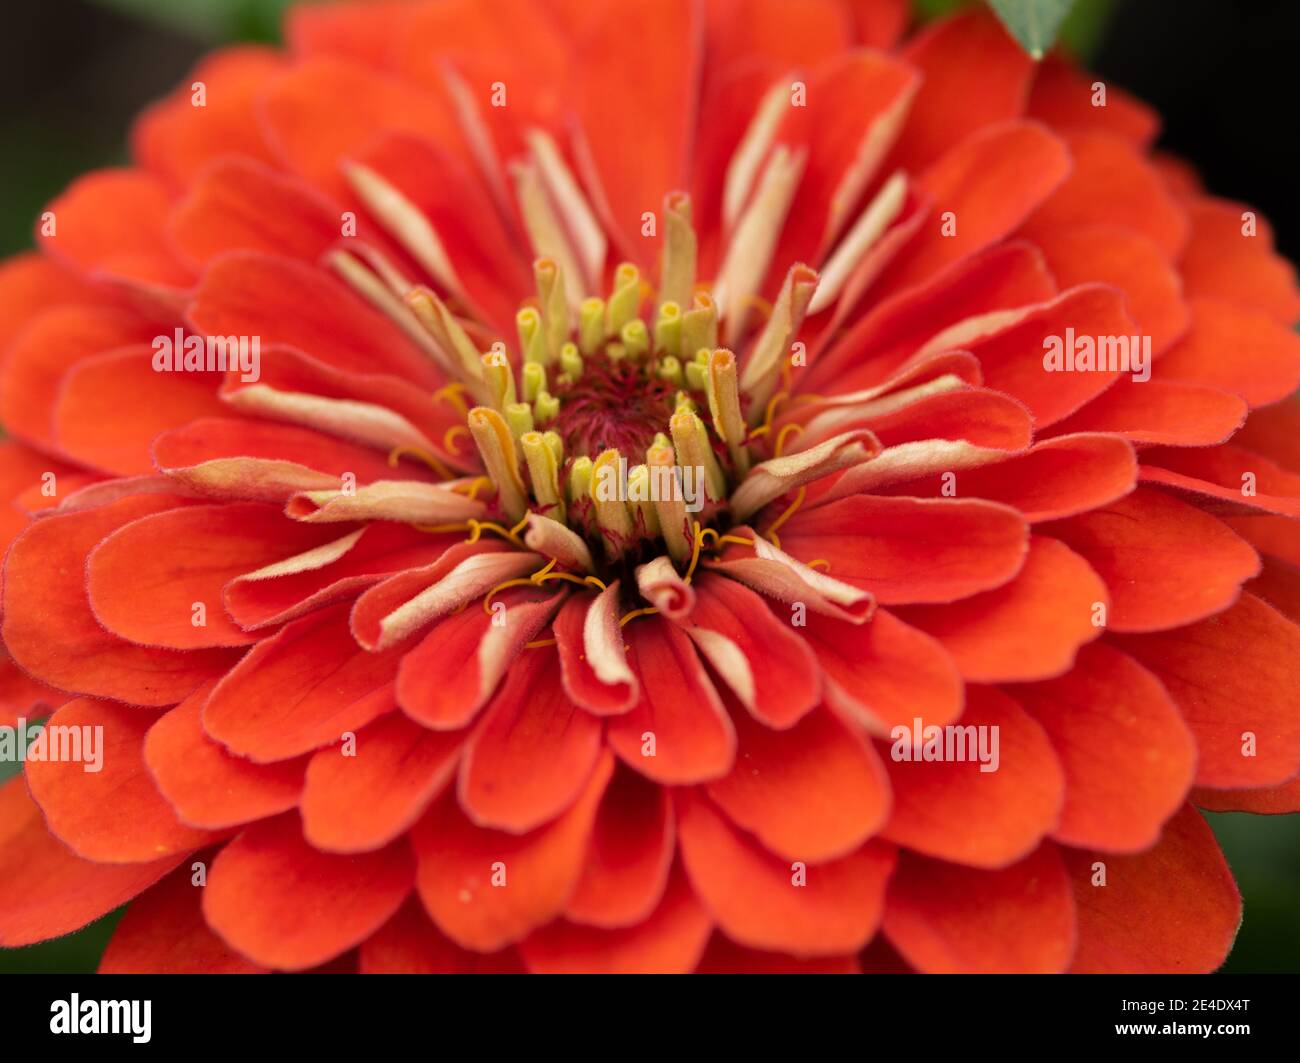 A bright red Dahlia flower close up blossom in the garden Stock Photo